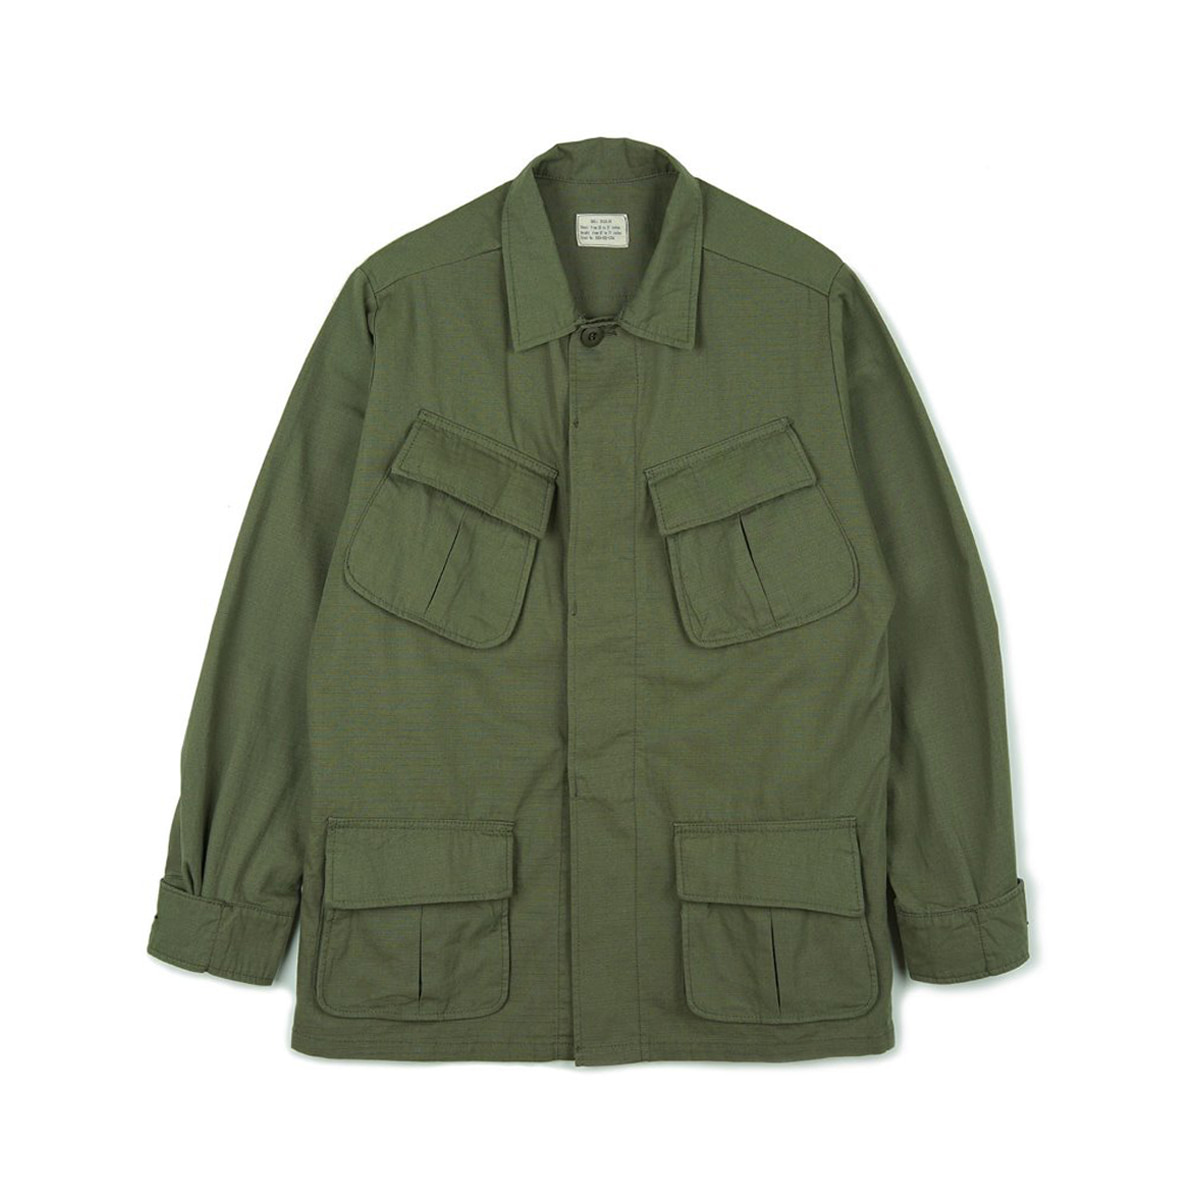 YMCLKY] US JUNGLE FATIGUE JACKET 4TH MODEL 'OLIVE' - RINOSTORE